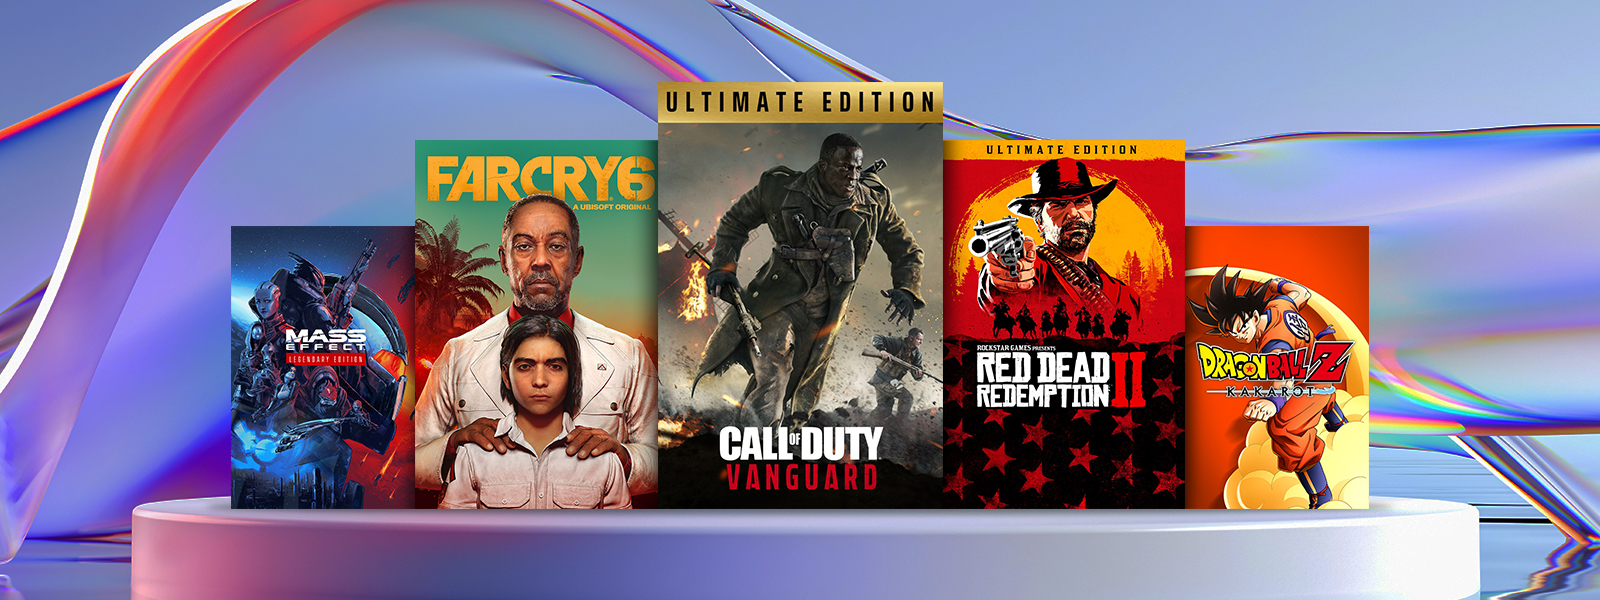 Box art from games that are part of the Super Saver Sale, including Mass Effect Legendary Edition, Call of Duty: Vanguard - Ultimate Edition, and Red Dead Redemption II.